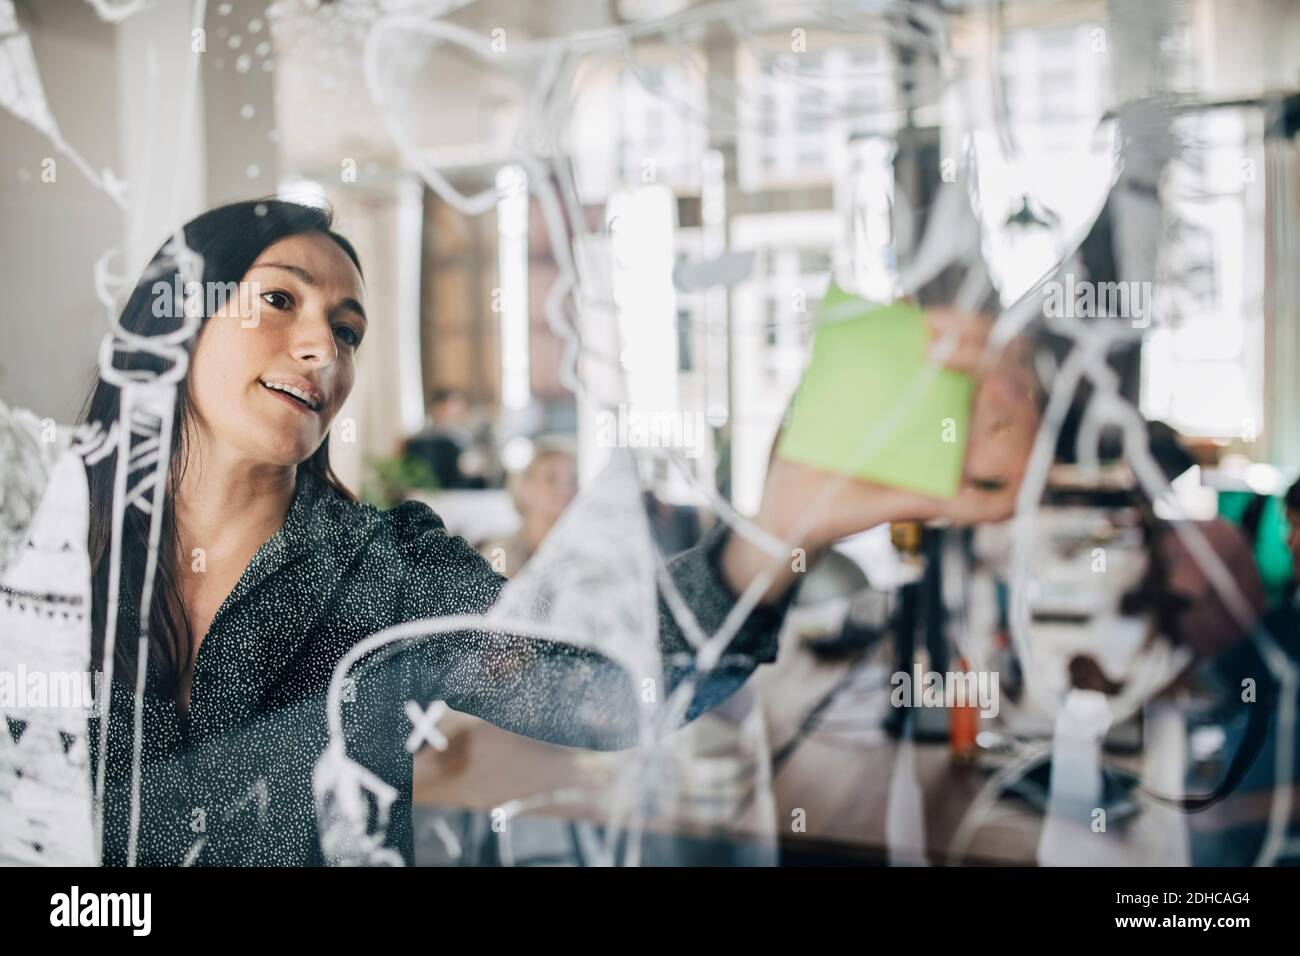 Businesswoman sticking adhesive note on patterned glass in creative office Stock Photo